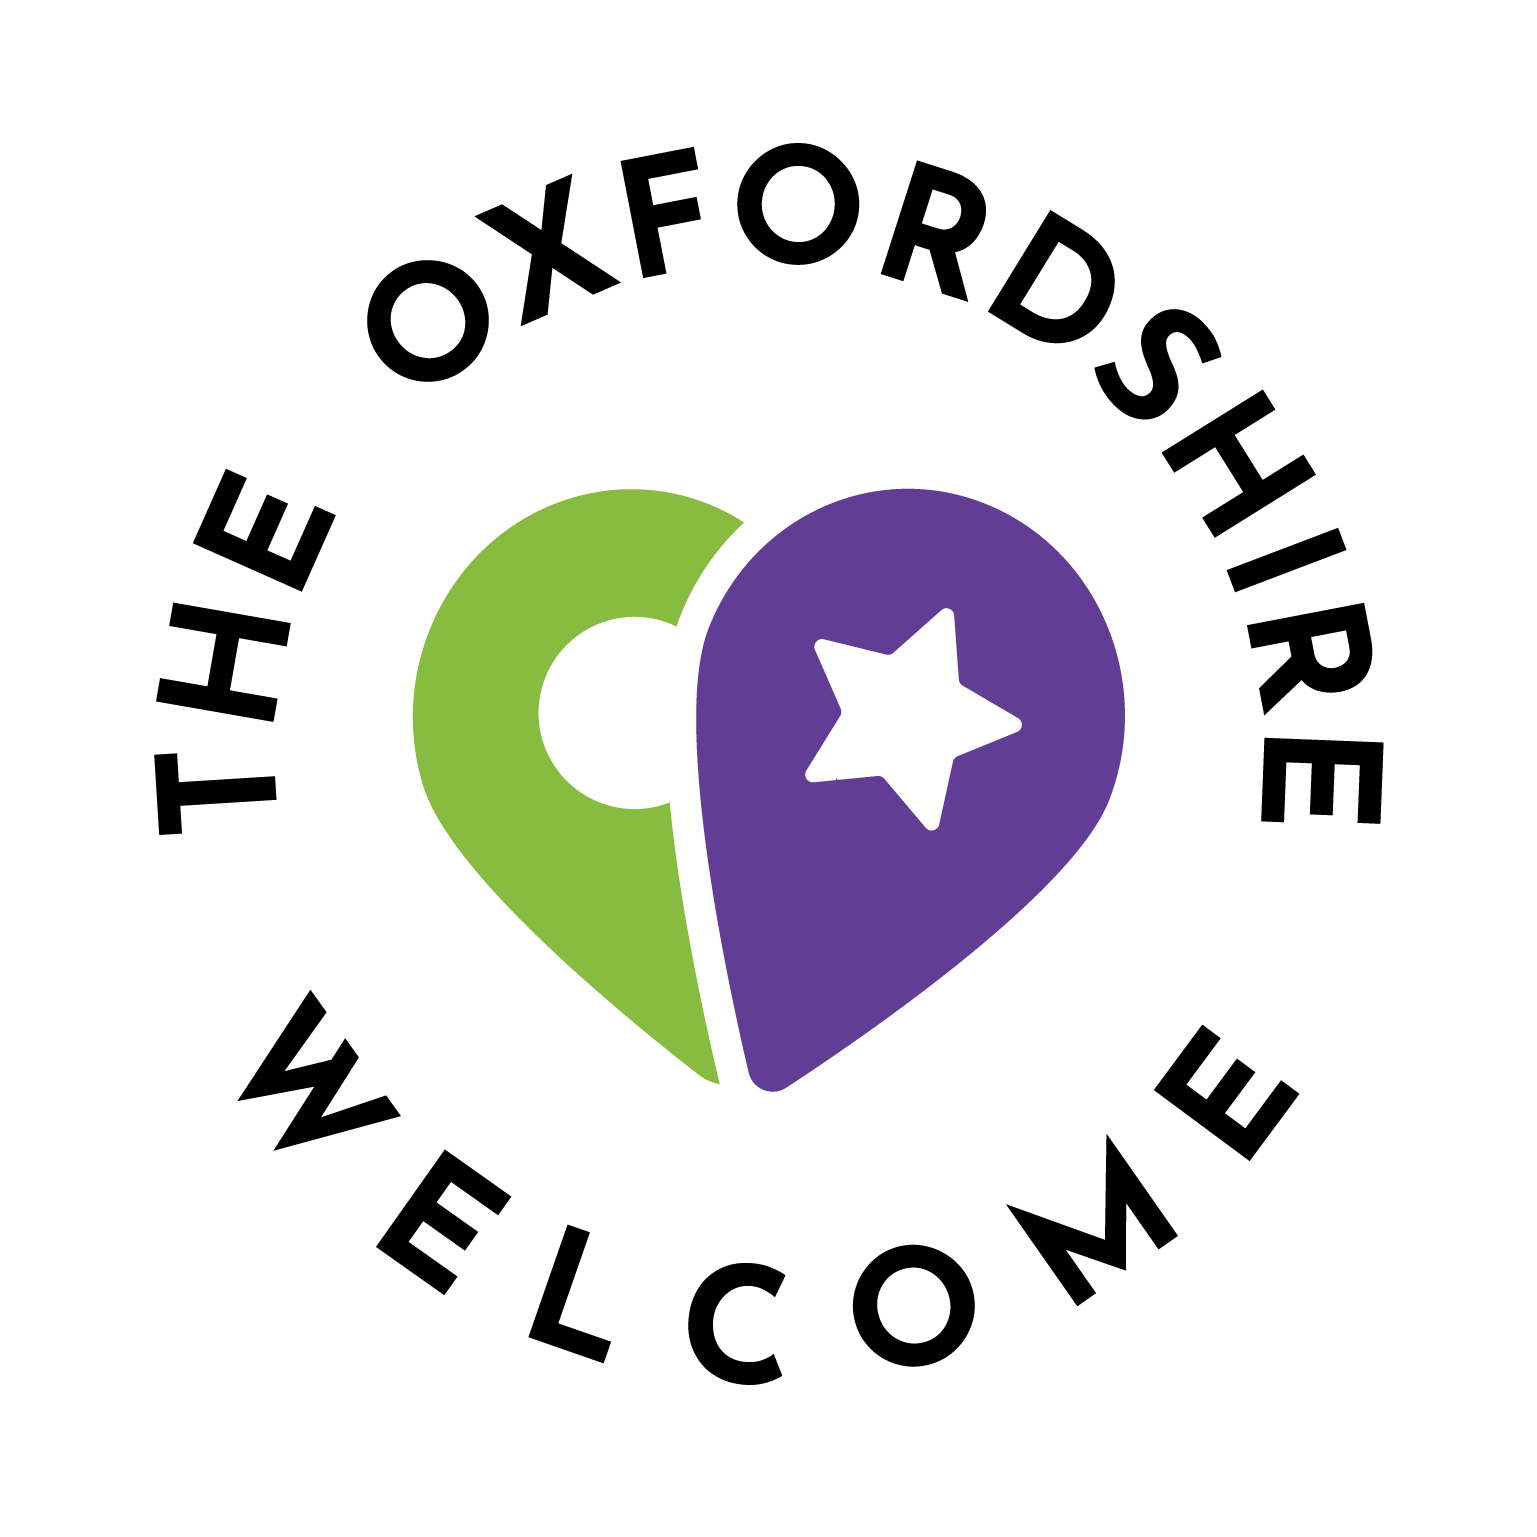 The Oxfordshire Welcome